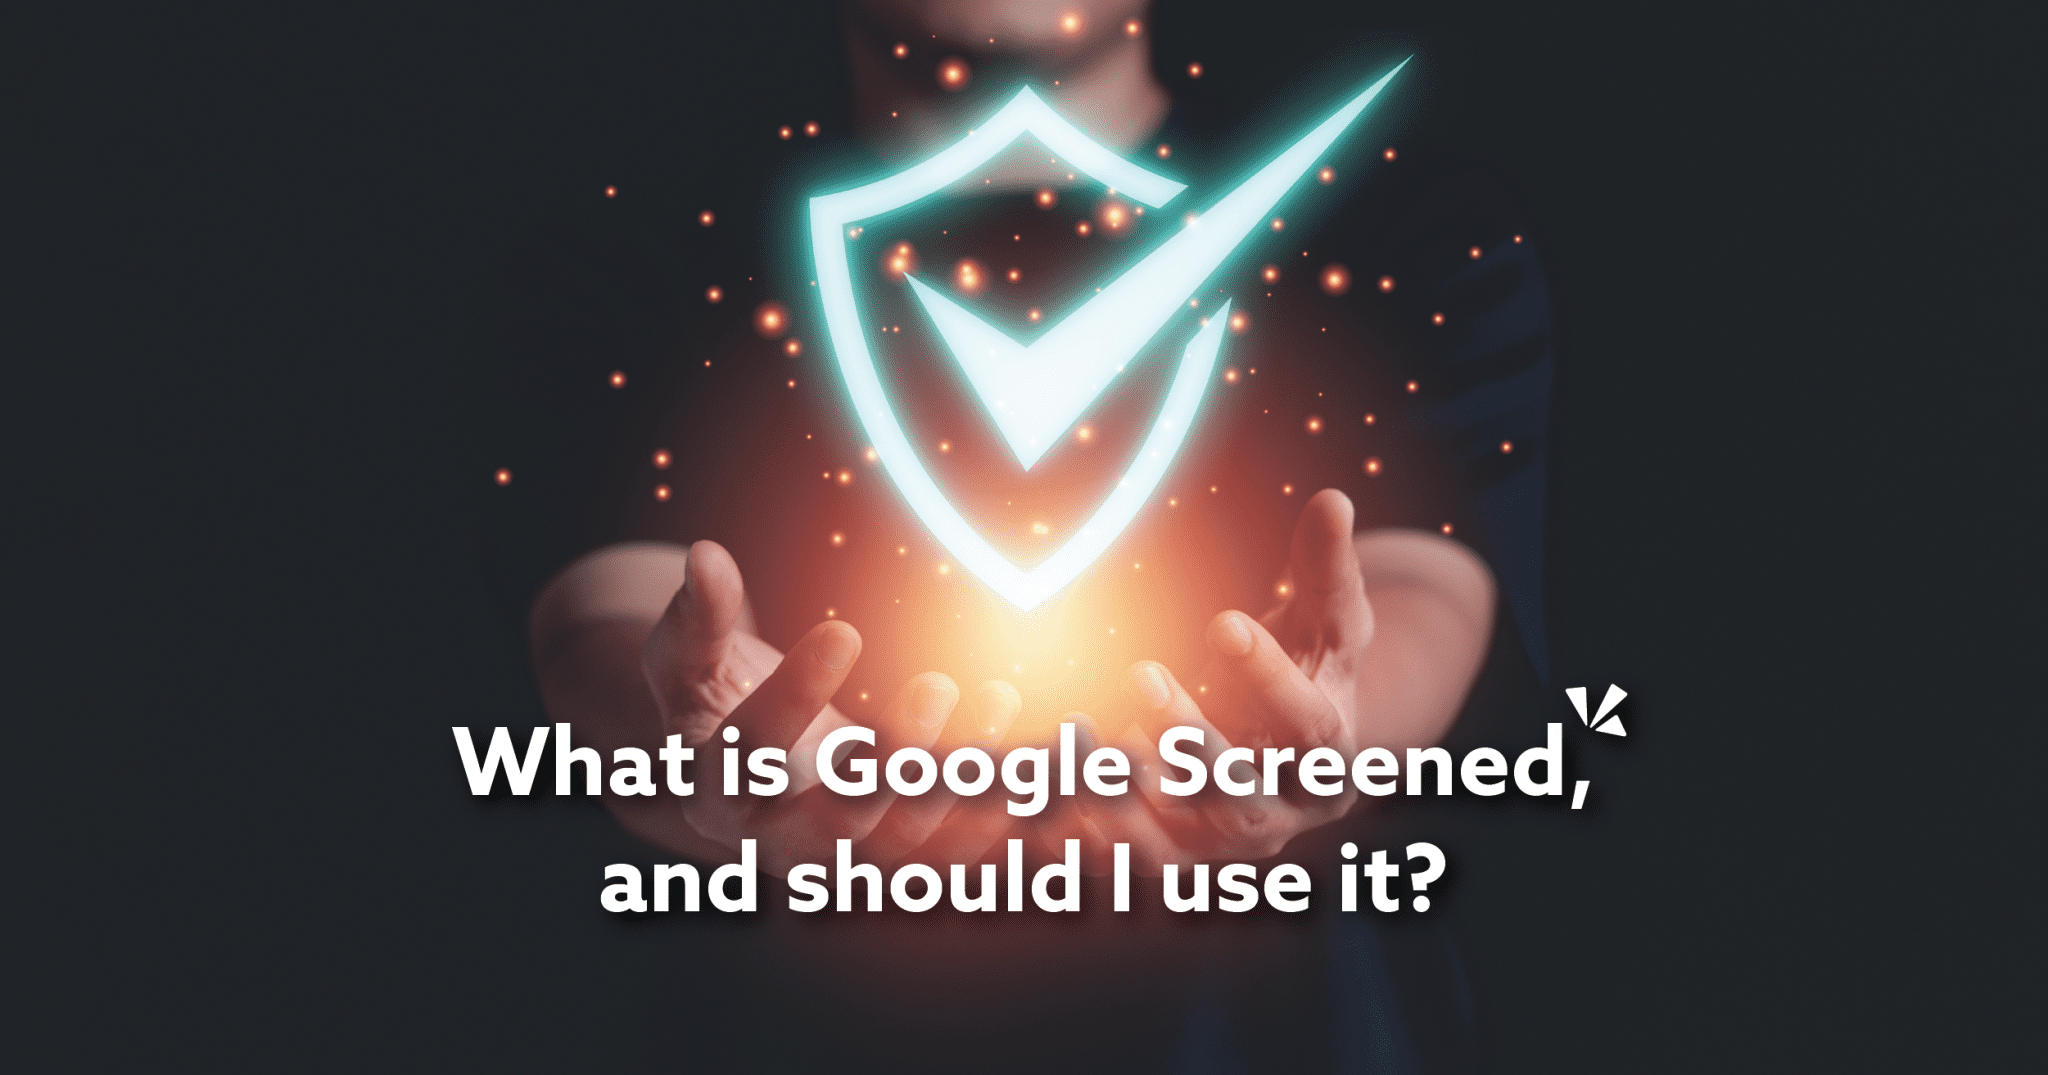 Text "What is Google Screened and Should I Use It?"